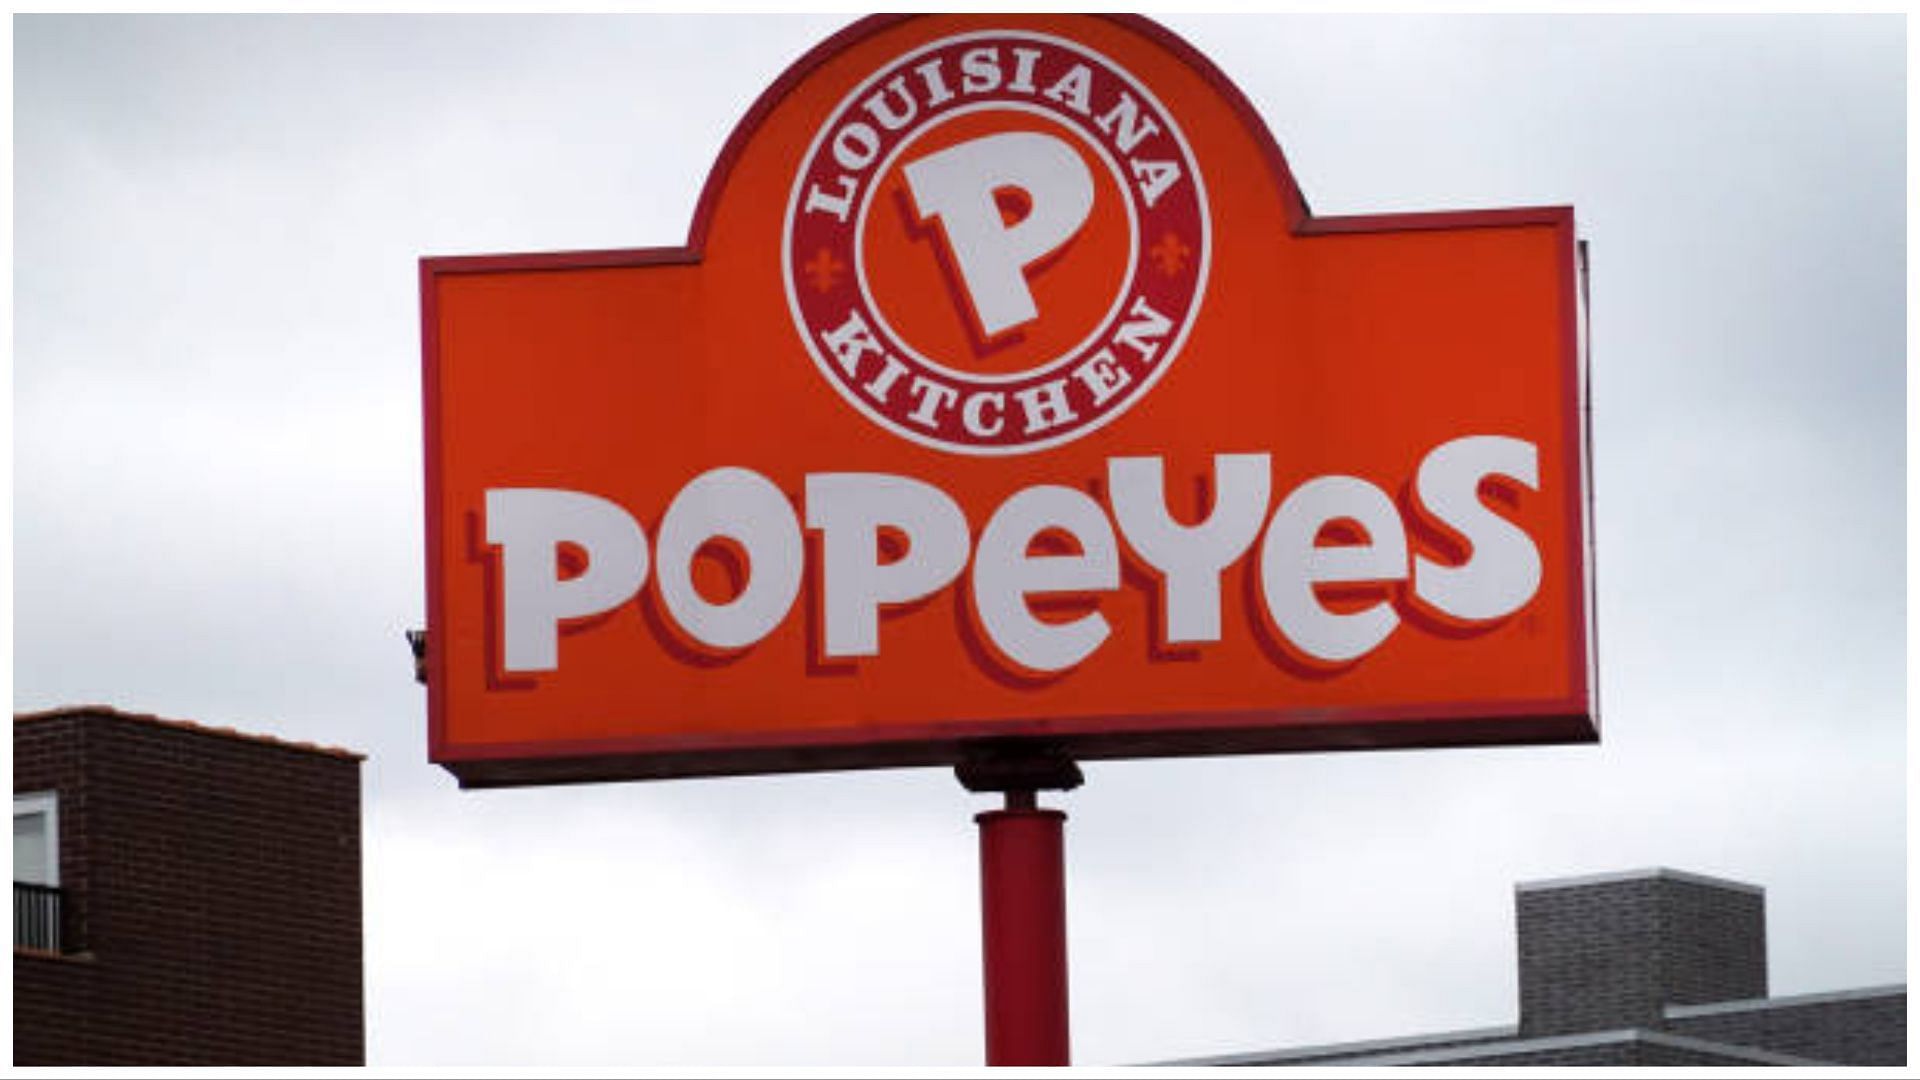 Popeyes is a very famous fast food chain of restaurants (Image via Getty Images)